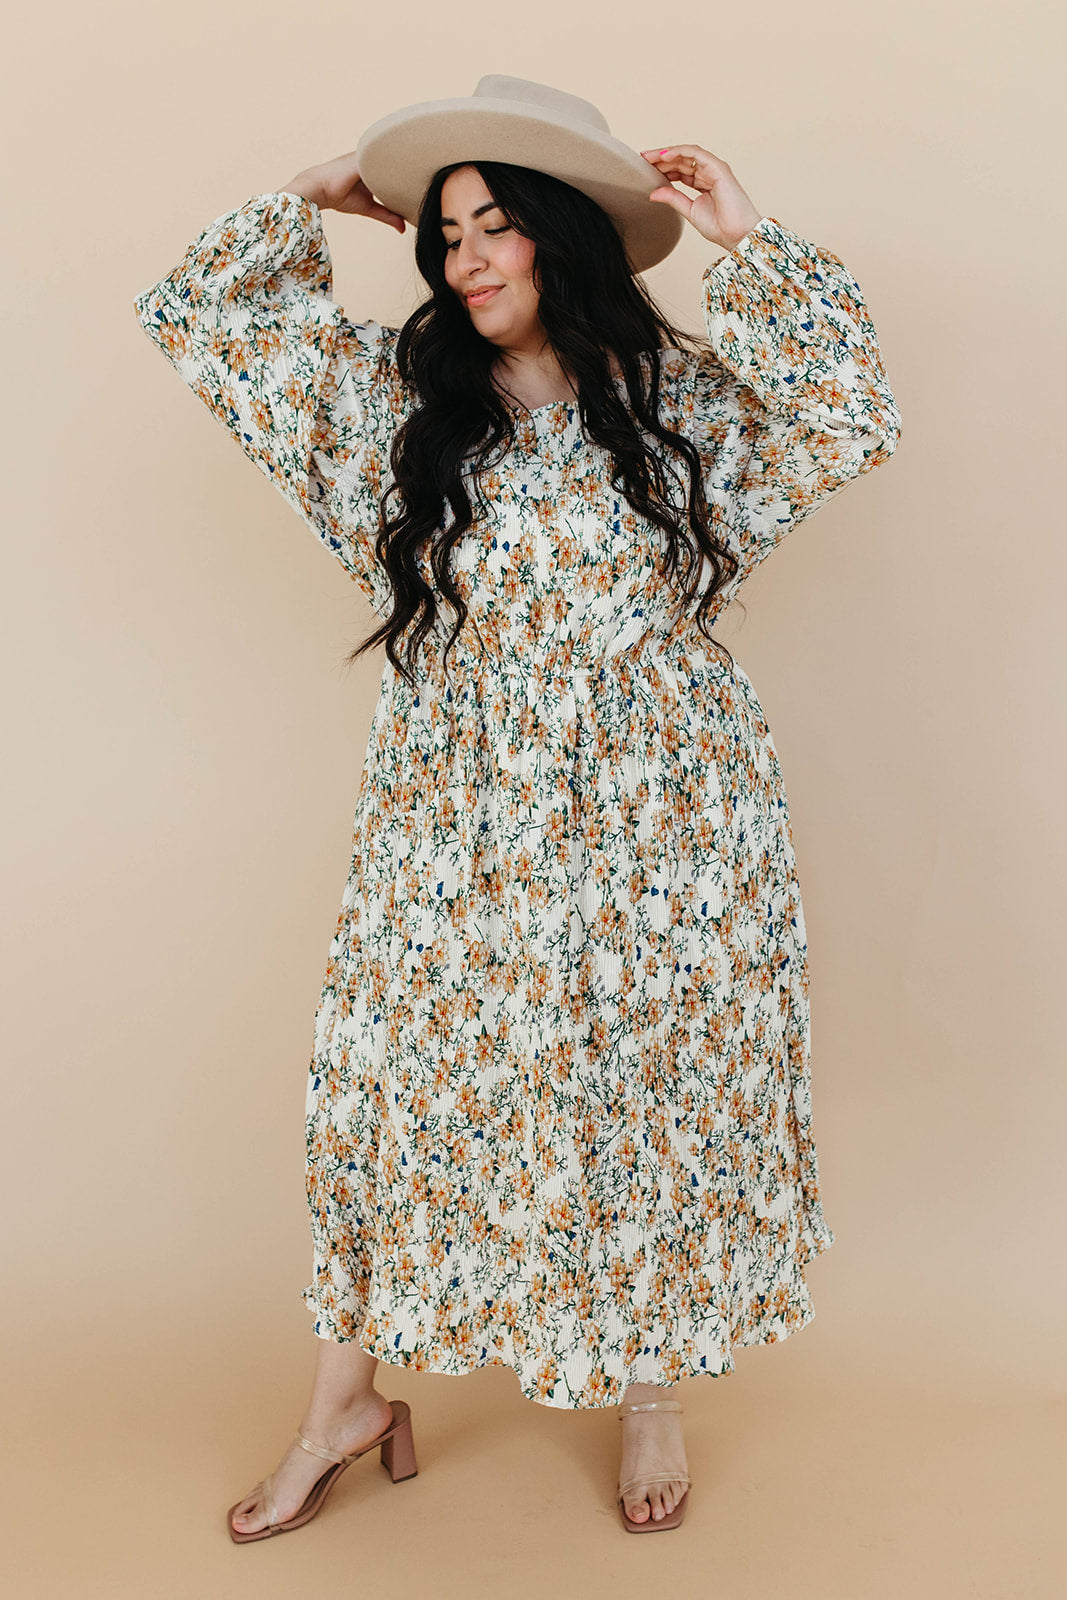 THE IVY DRESS IN IVORY FLORAL